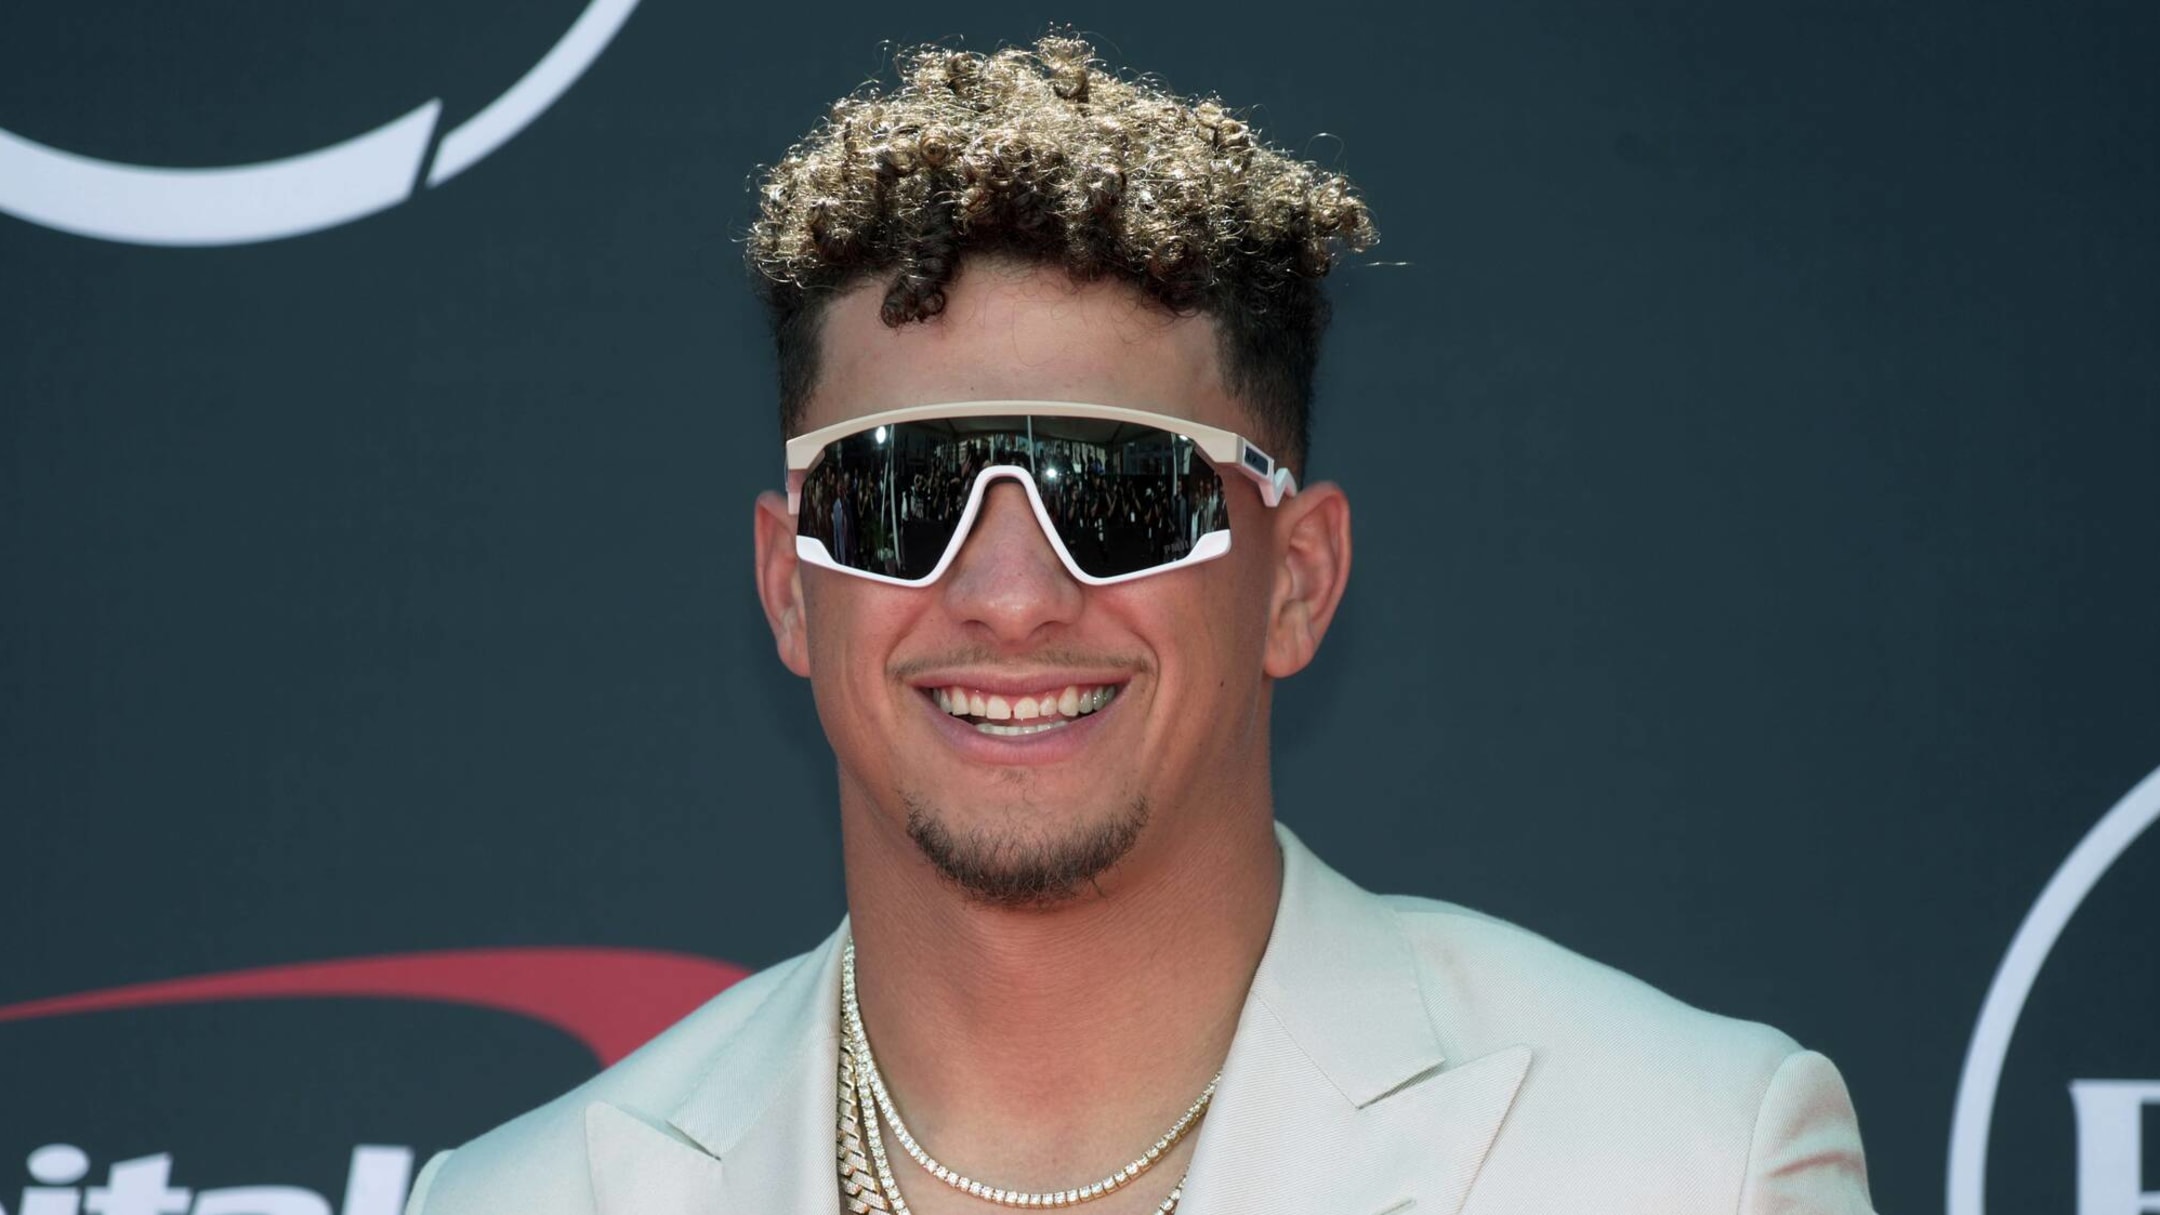 Chiefs: Patrick Mahomes rented Airbnb months before Super Bowl